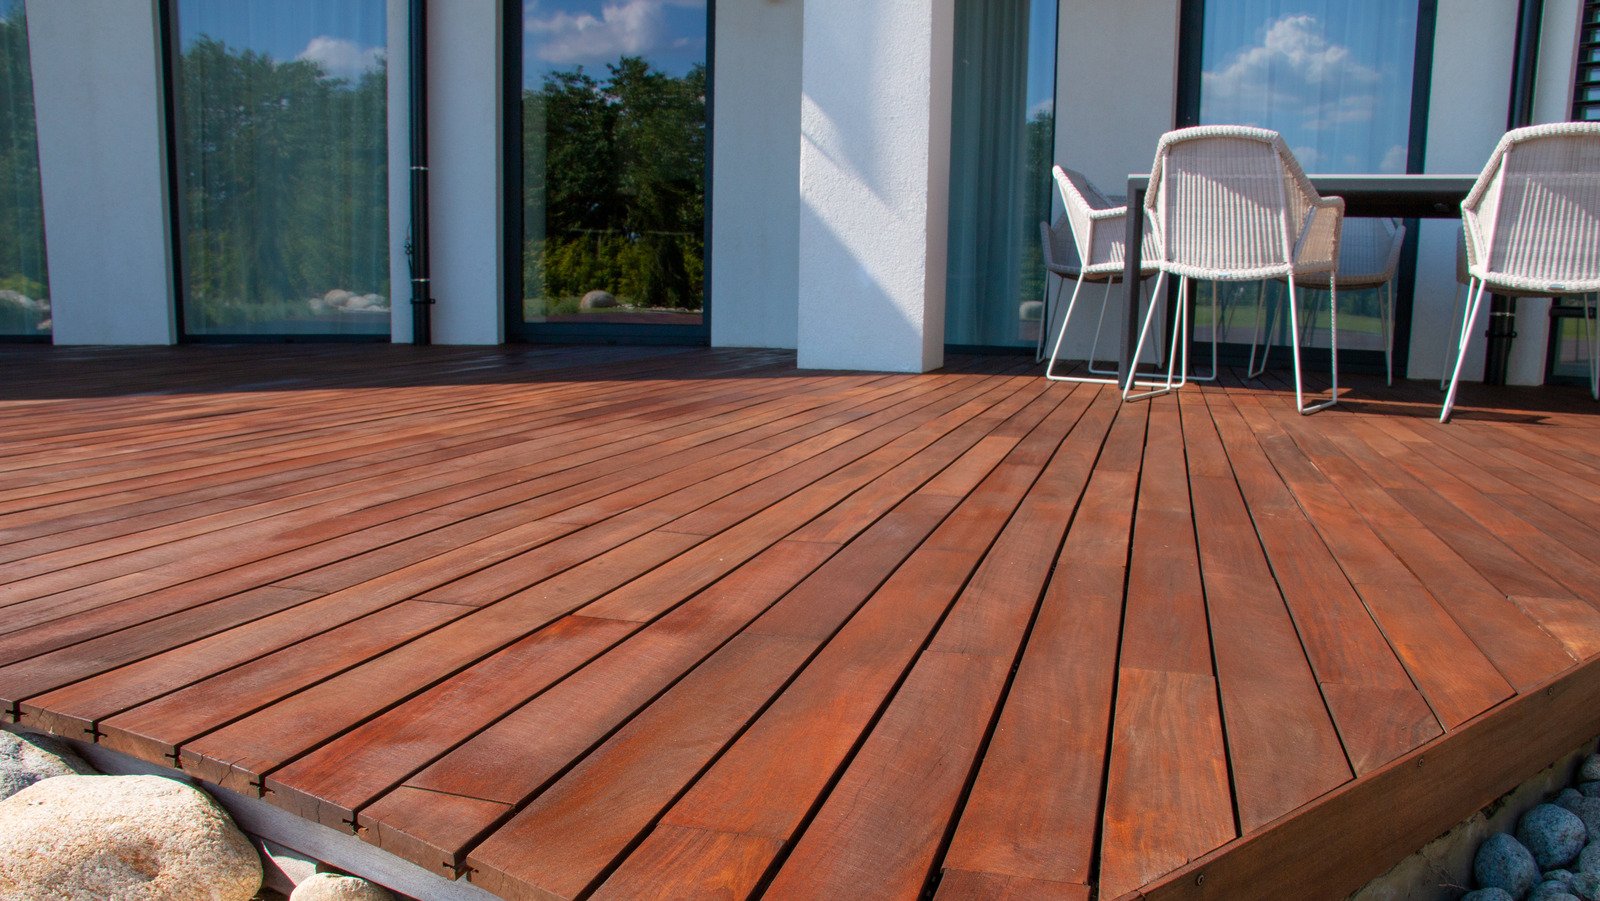 Hacks For Protecting Your Deck From The Blistering Summer Sun